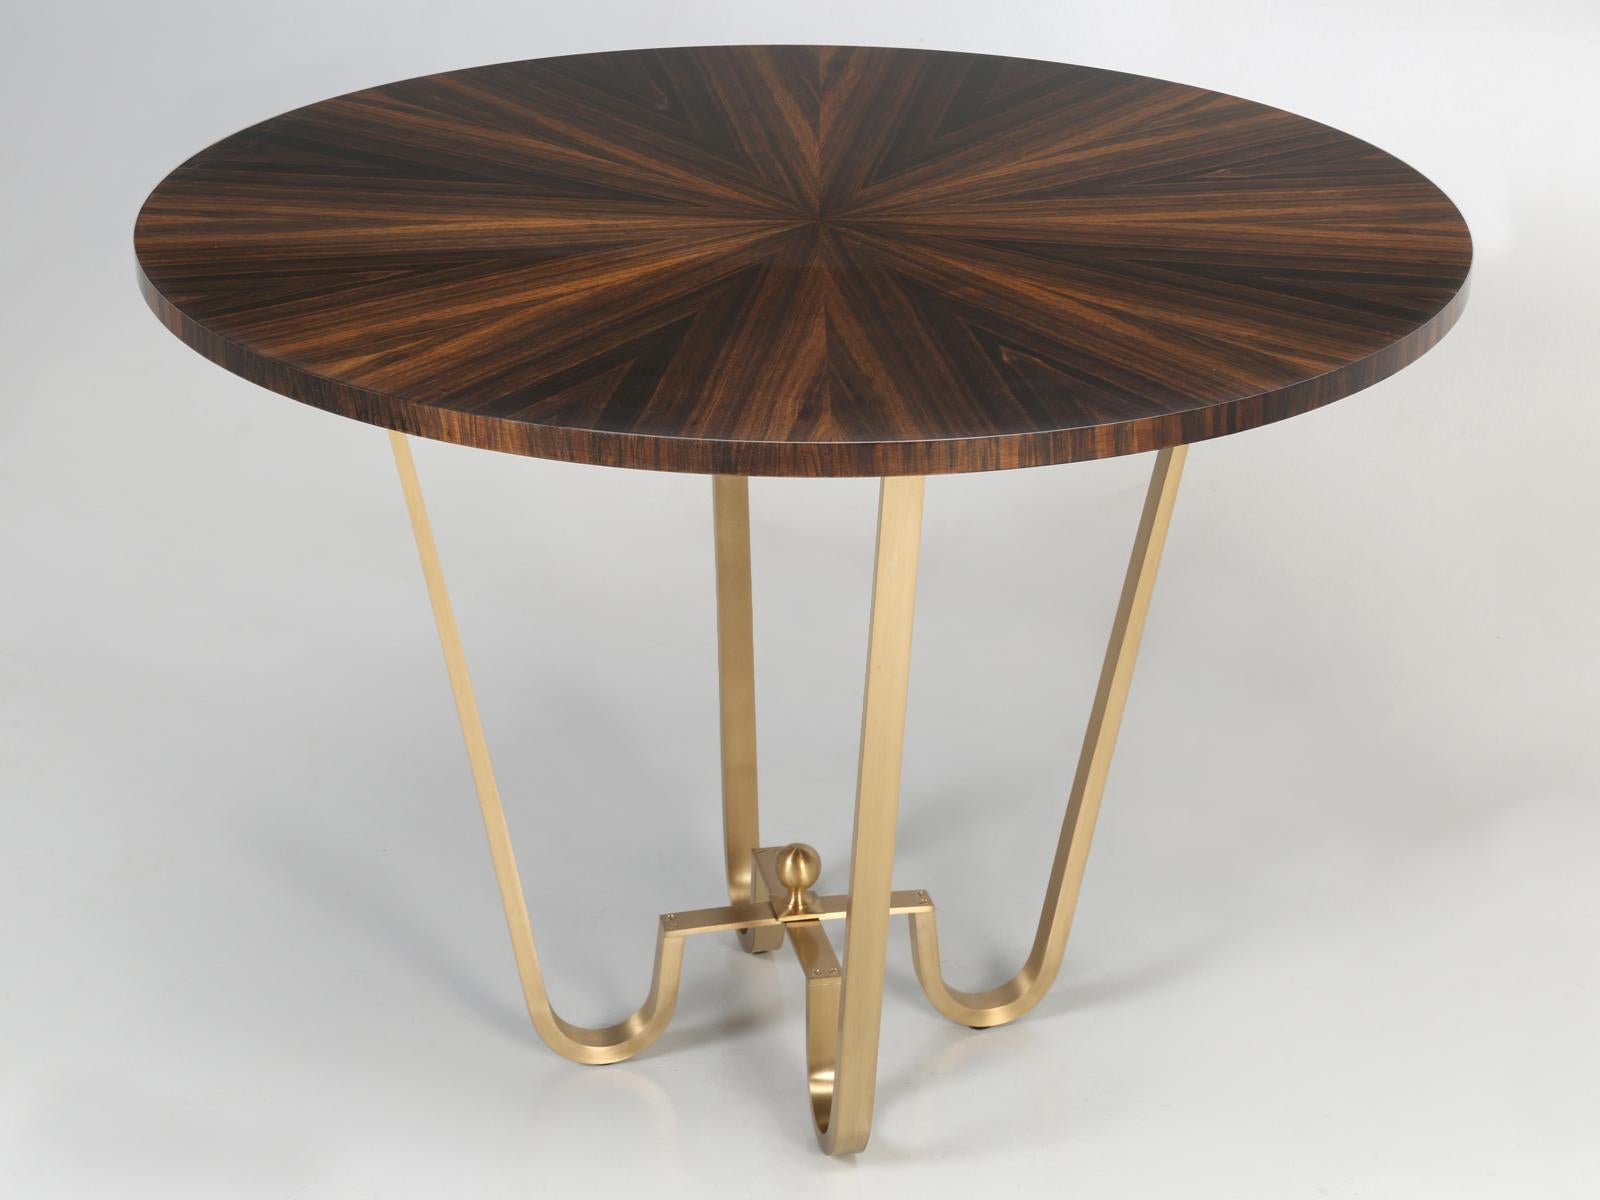 Solid Bronze Mid-Century Modern Center Hall Table, Game Table or Side Table, Handmade in our Old Plank Chicago Work Shop to your exact specifications. The example shown here has a solid bronze base and a Macassar Ebony sunburst pattern top in a